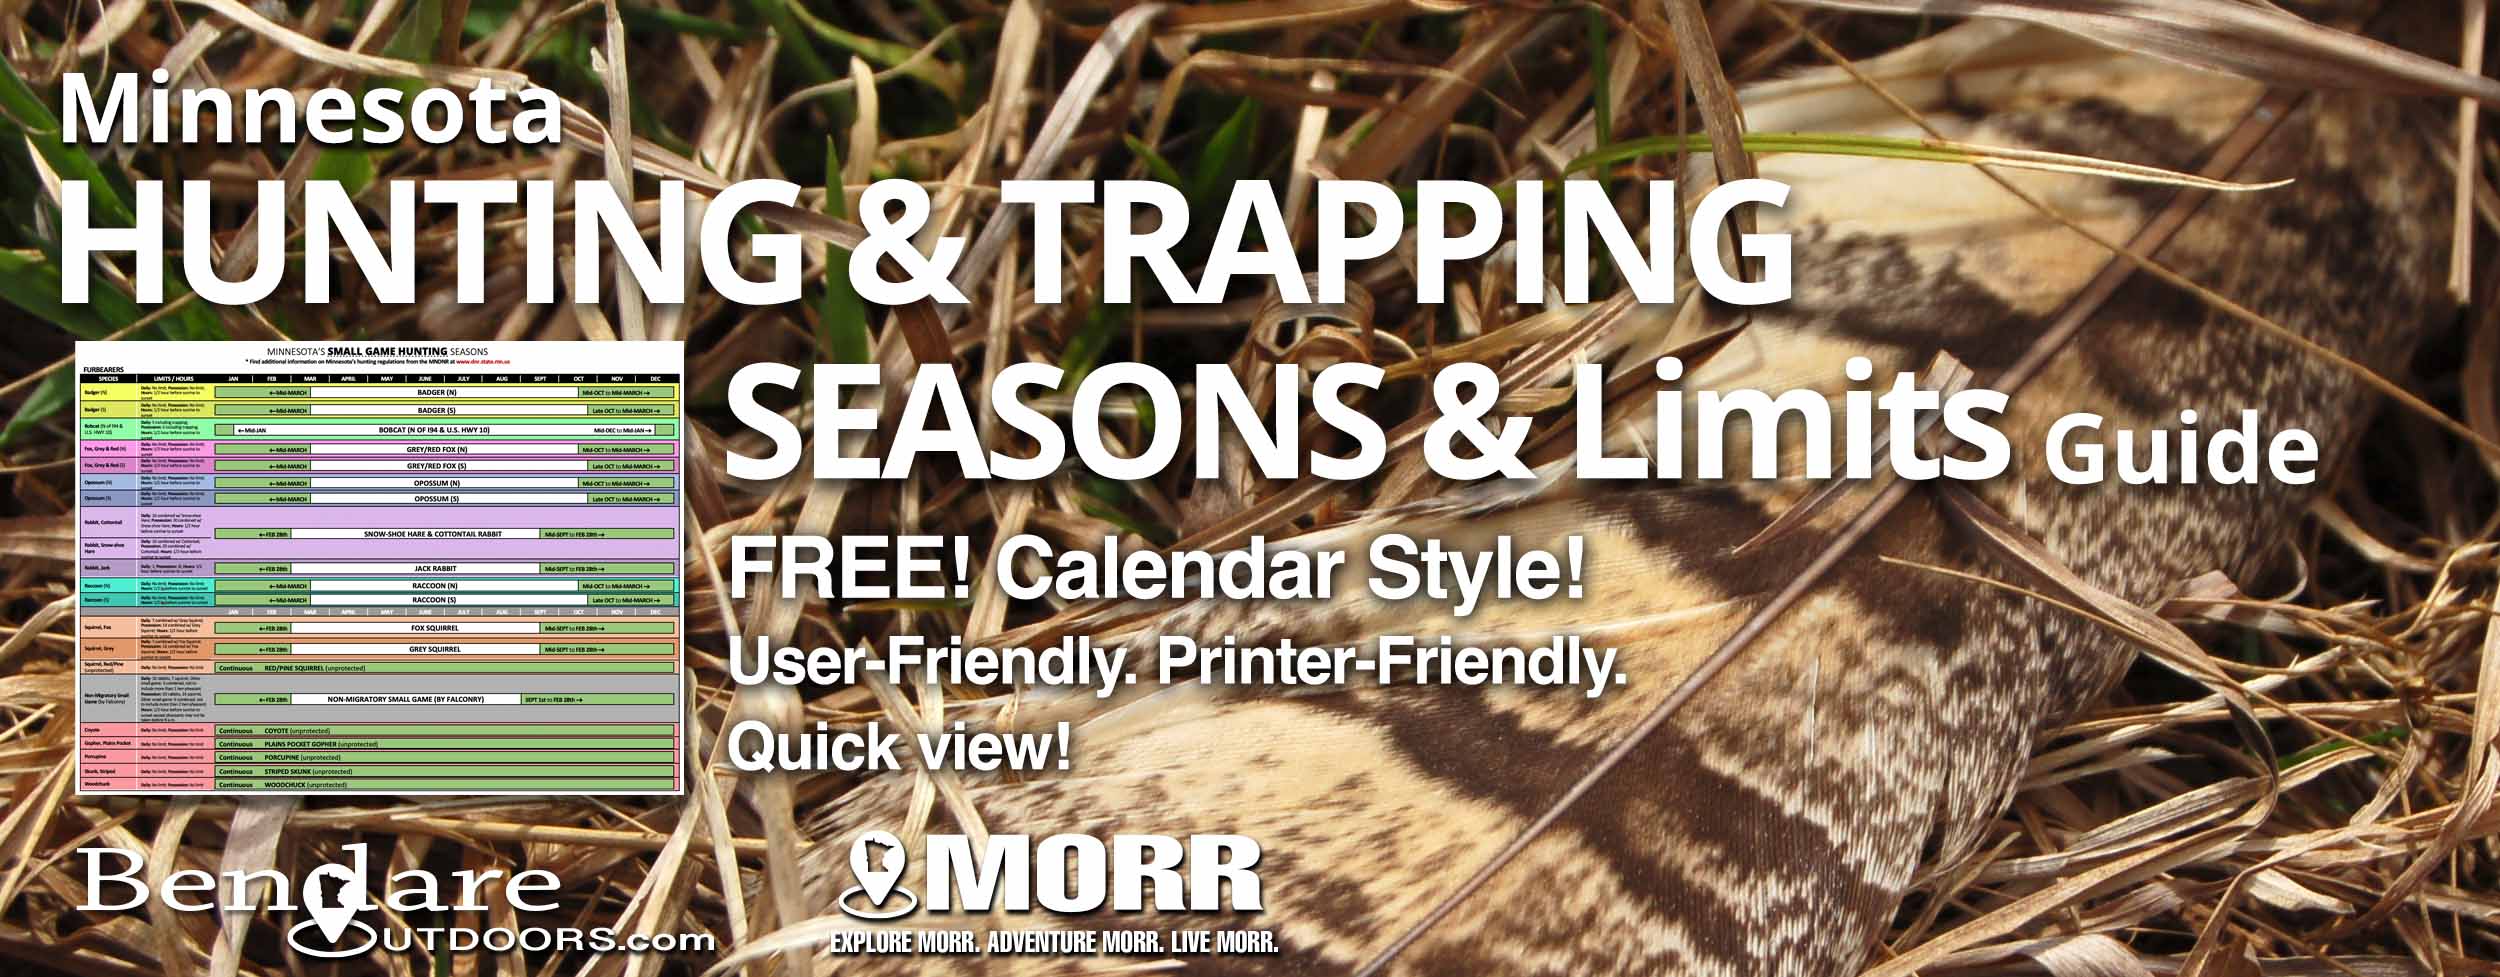 Minnesota Hunting and Trapping Seasons and Limits by Bendare Outdoors